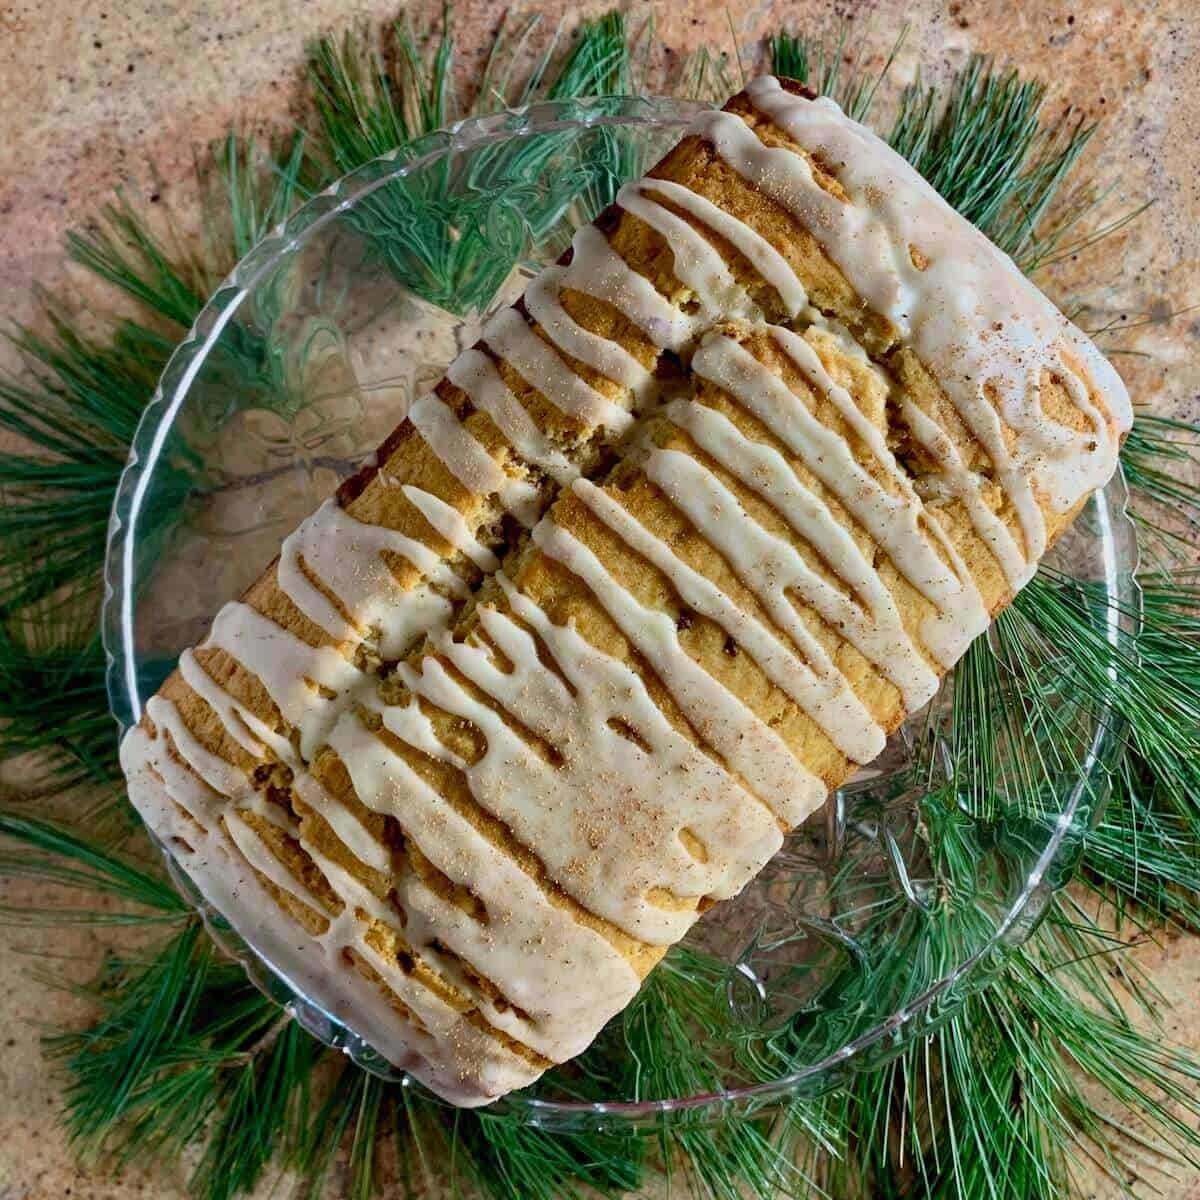 Whole eggnog bread on a glass cake stand atop pine needles from overhead.